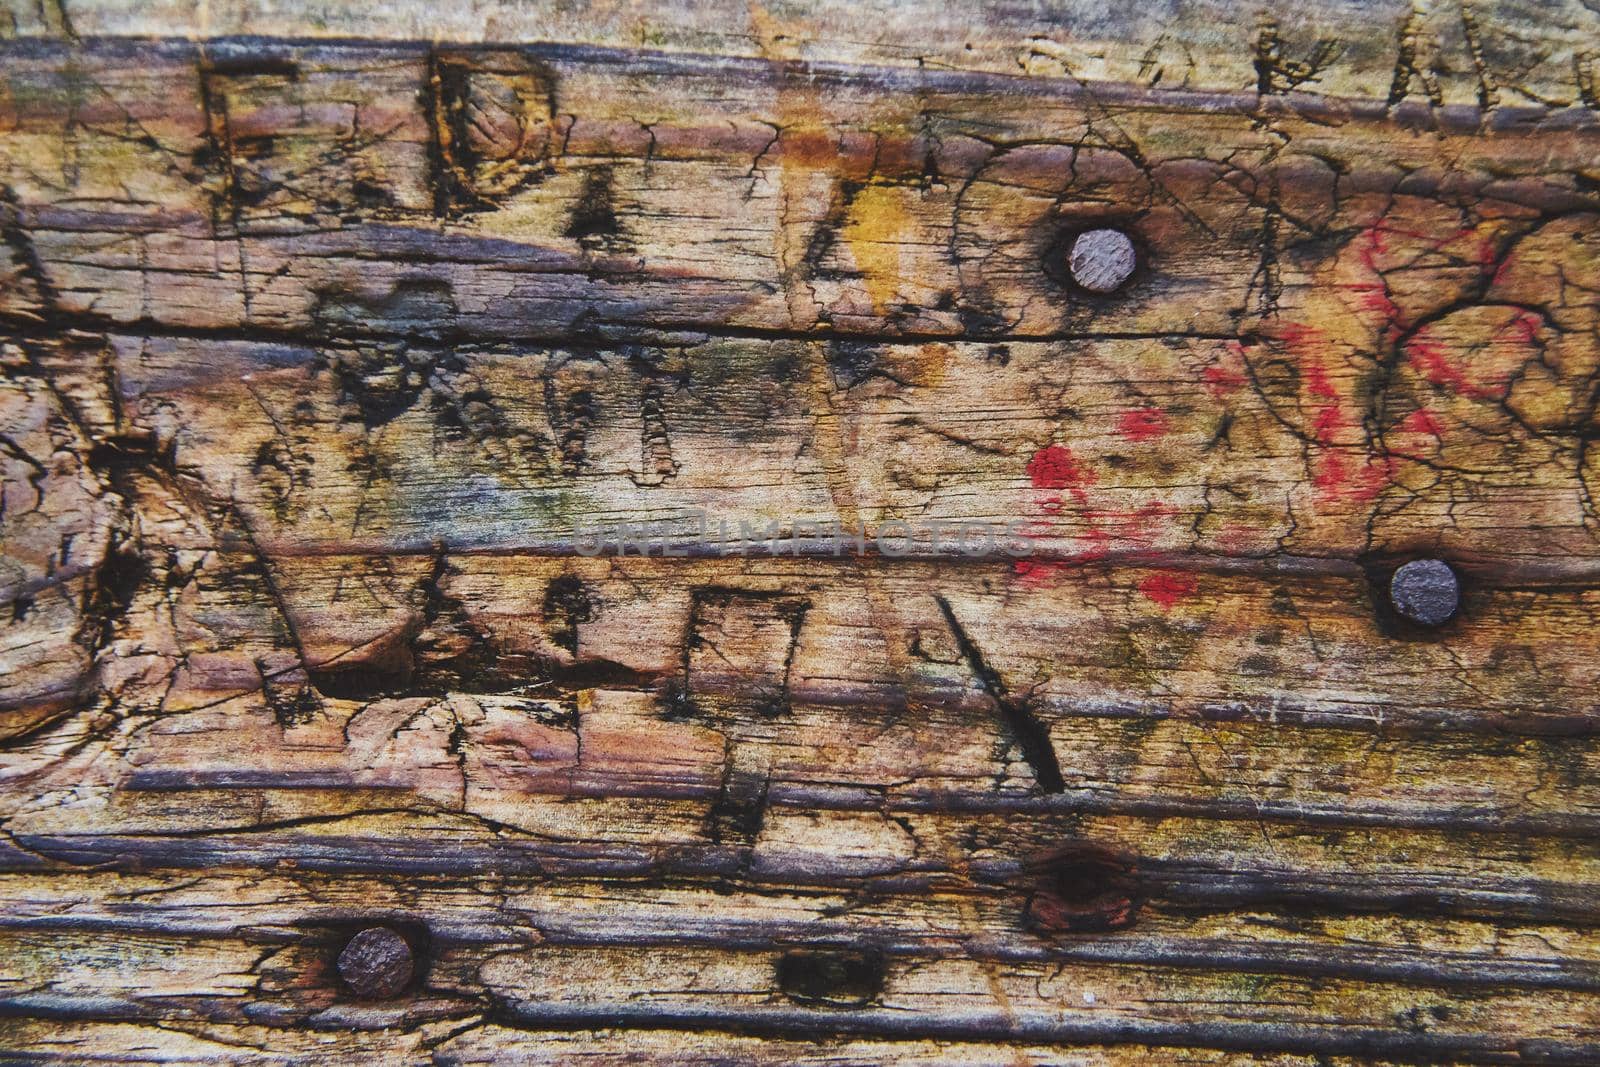 Image of Texture of old wood plant up close with people;s initials carved into it